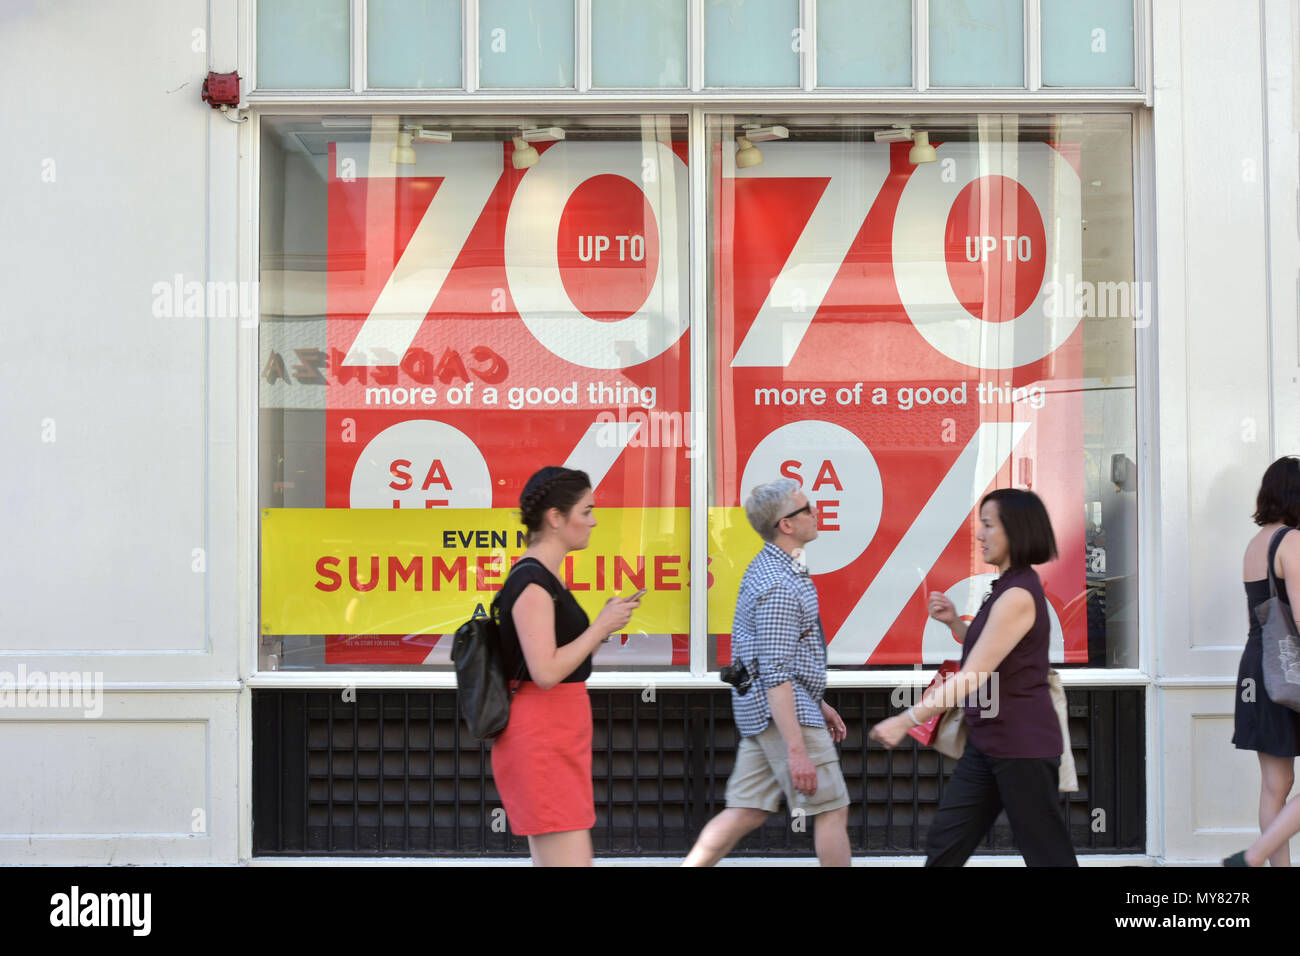 Tourists and shoppers walk past the shops with 70% further reduction and summer sale signs, on Long Acre, Covent Garden Stock Photo